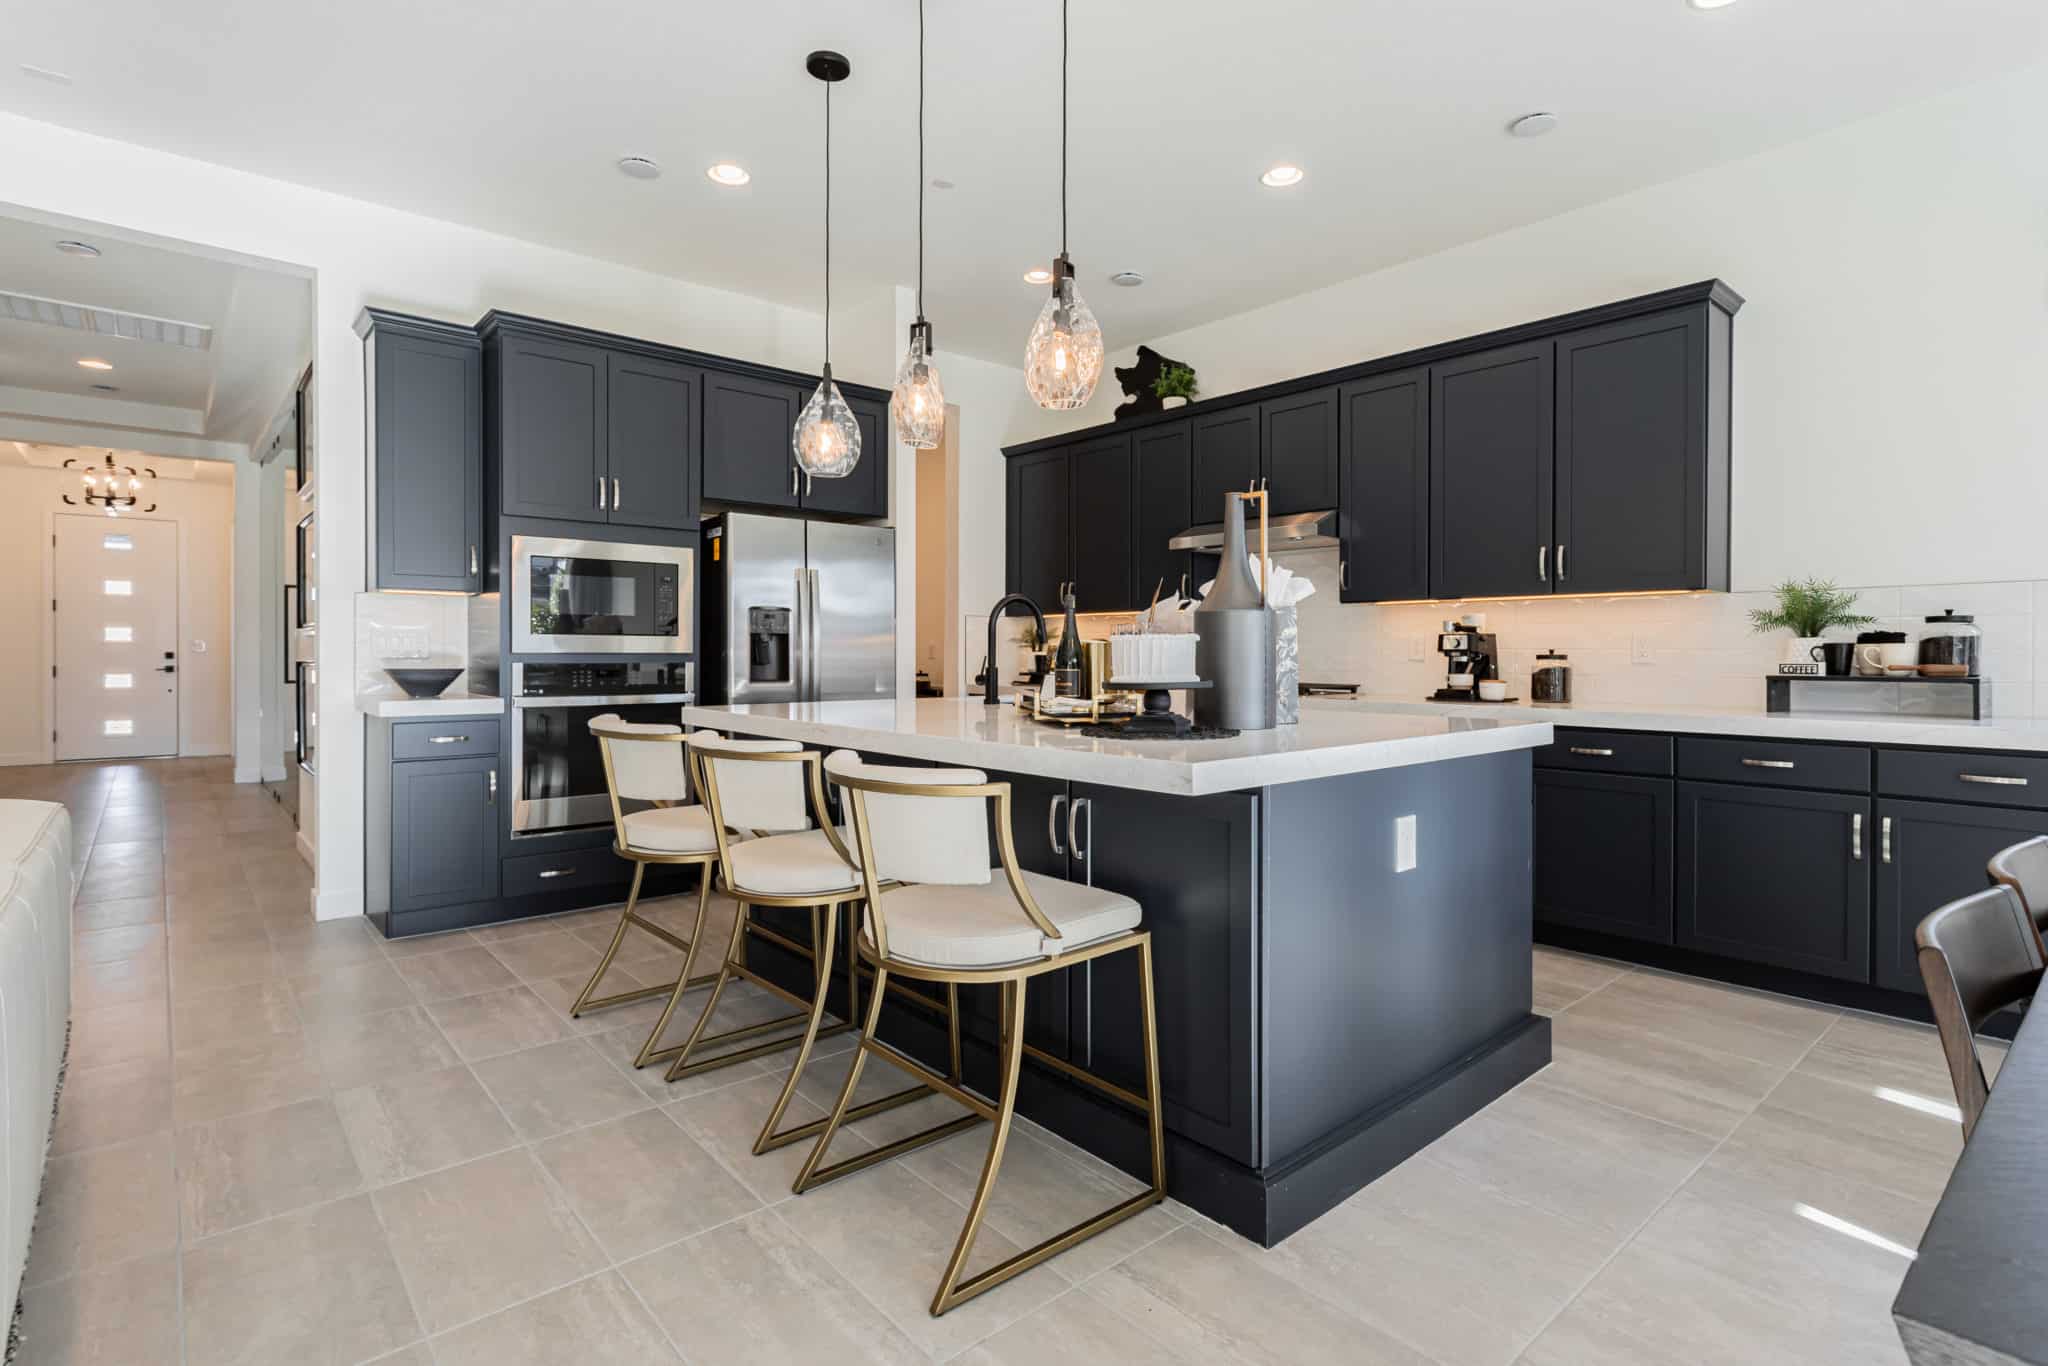 Kitchen of Talon Plan 1 at Falcon Crest by Woodside